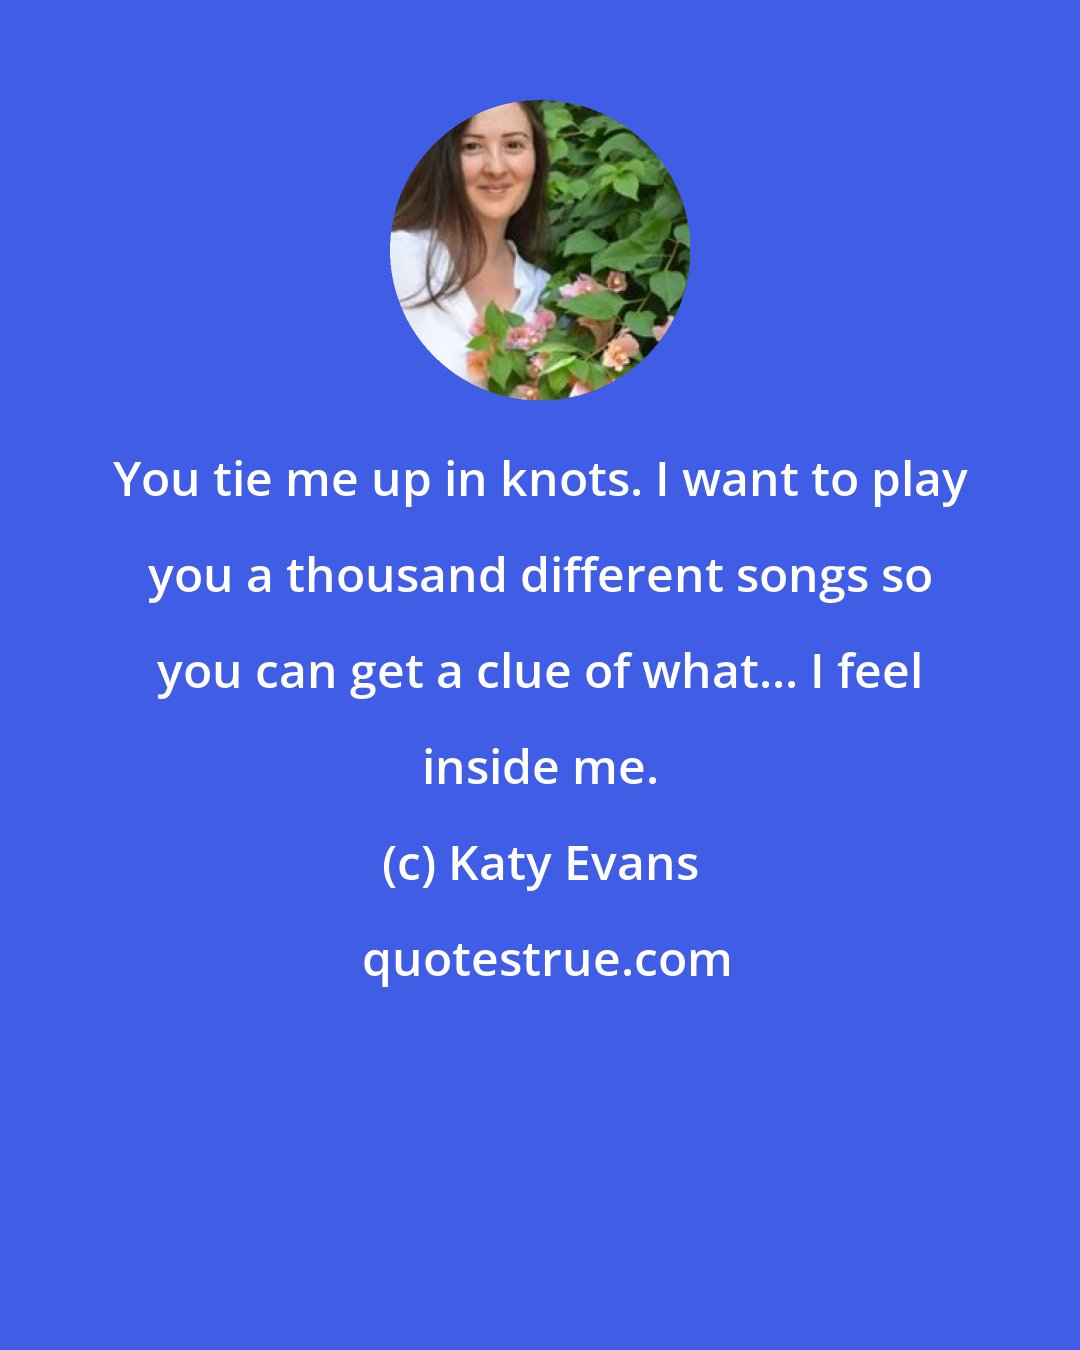 Katy Evans: You tie me up in knots. I want to play you a thousand different songs so you can get a clue of what... I feel inside me.